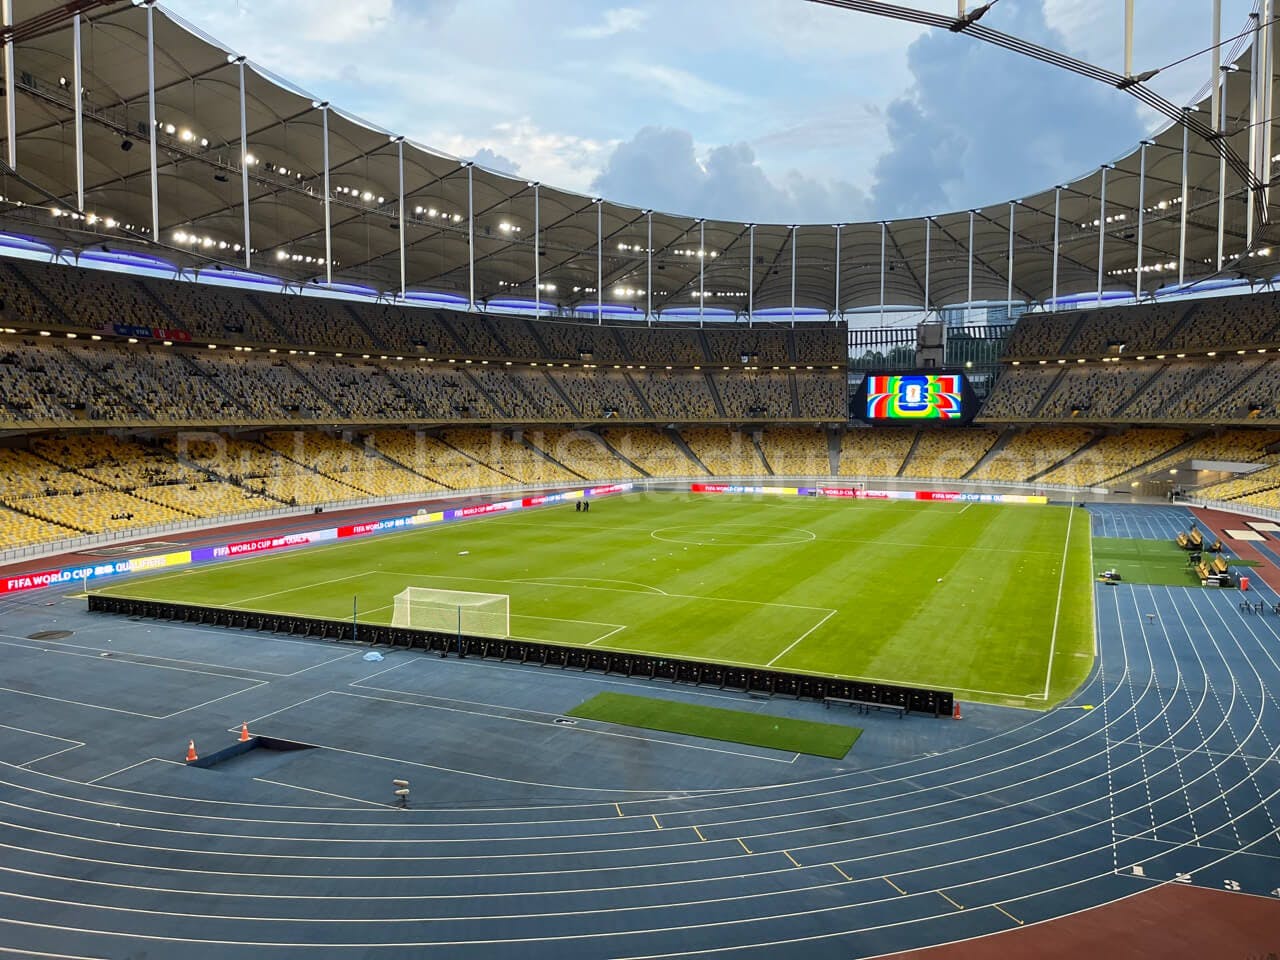 1x View of Bukit Jalil field from section 202 of Stadium Bukit Jalil.